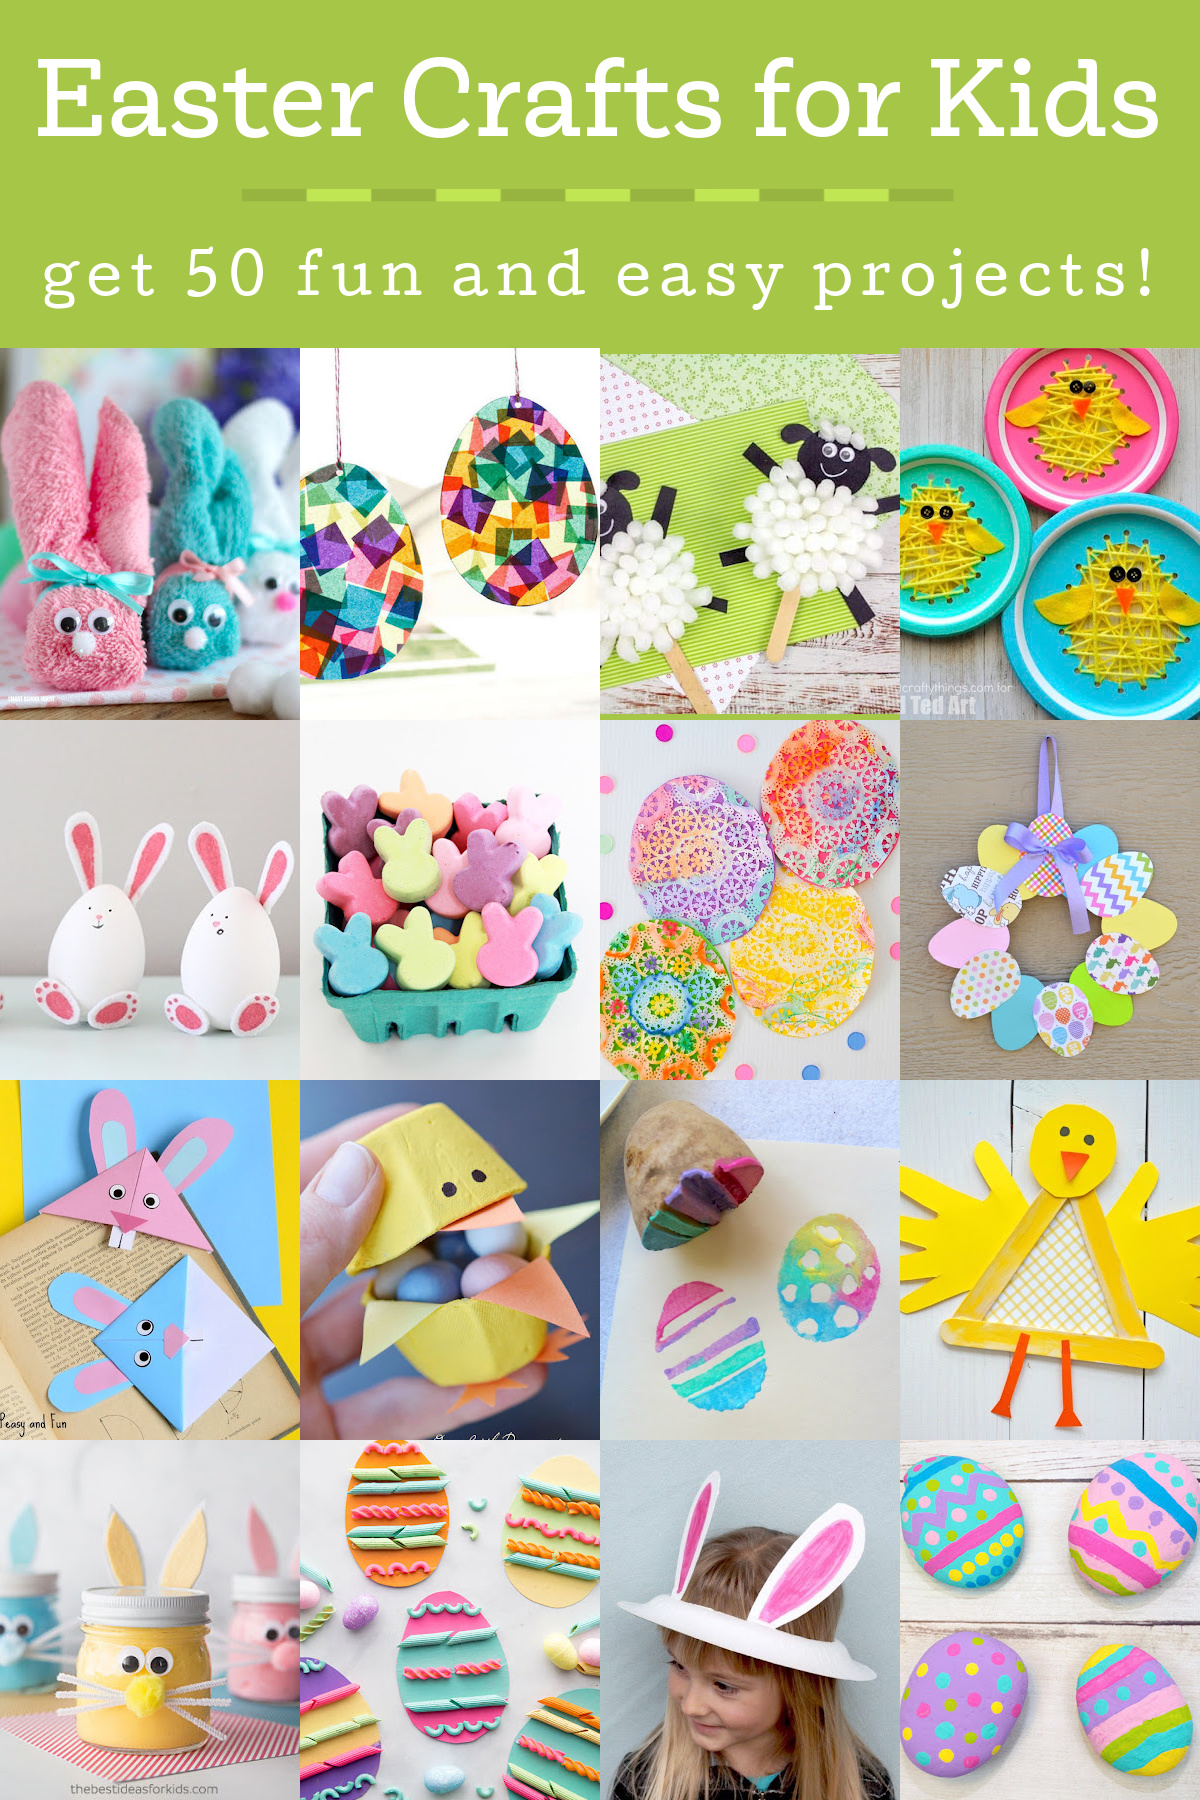 Easter Crafts for Kids They'll Love